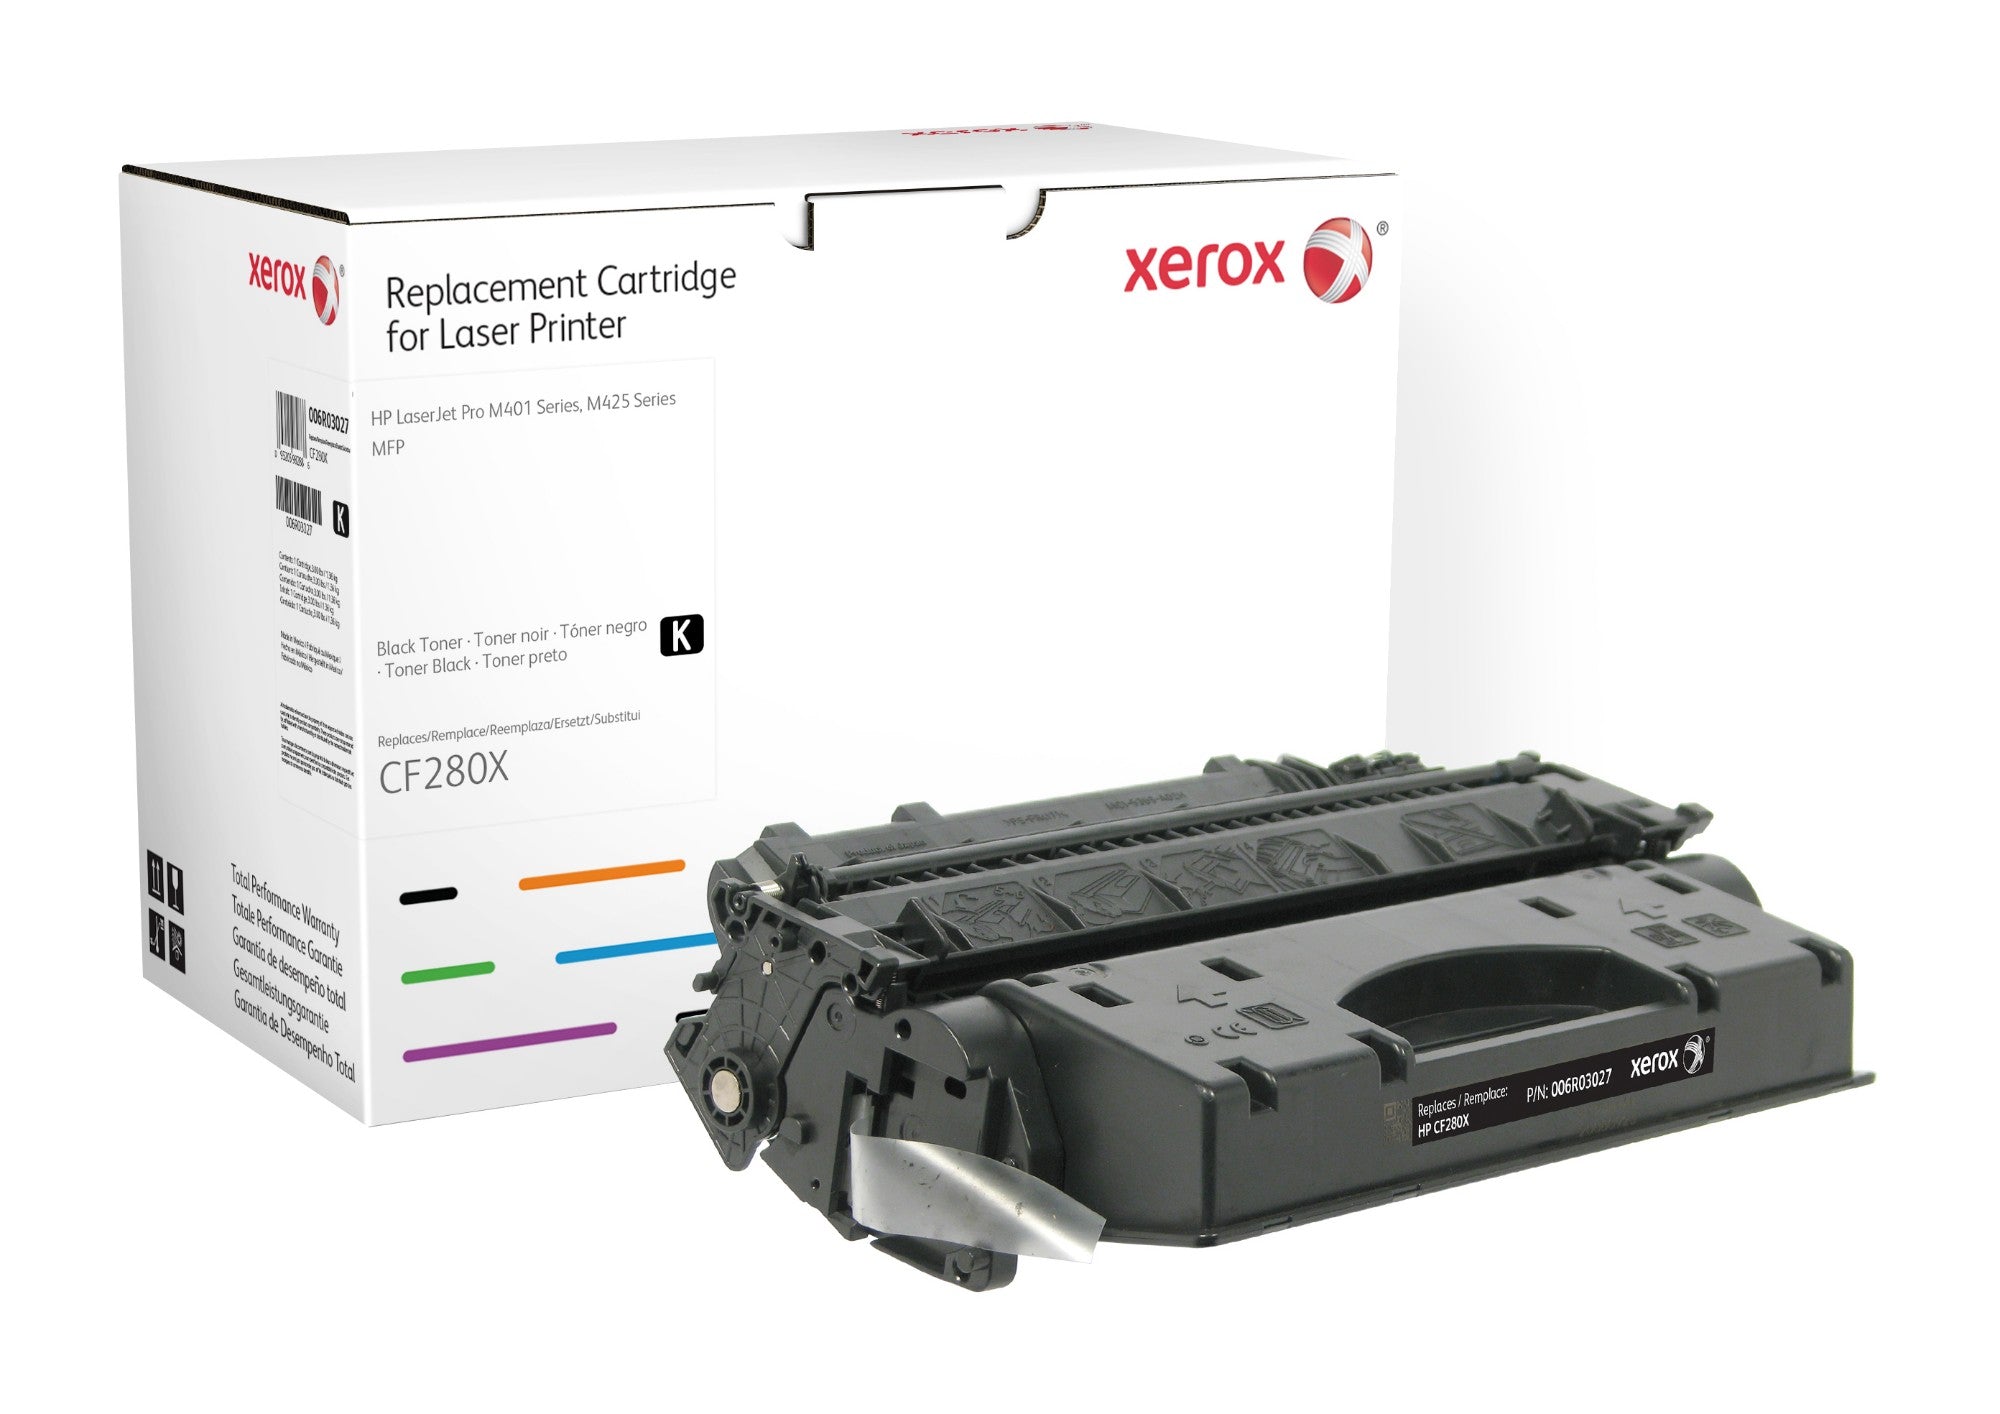 Xerox 006R03027 Toner cartridge black, 1x6.9K pages Pack=1 (replaces HP 80X/CF280X) for HP Pro 400